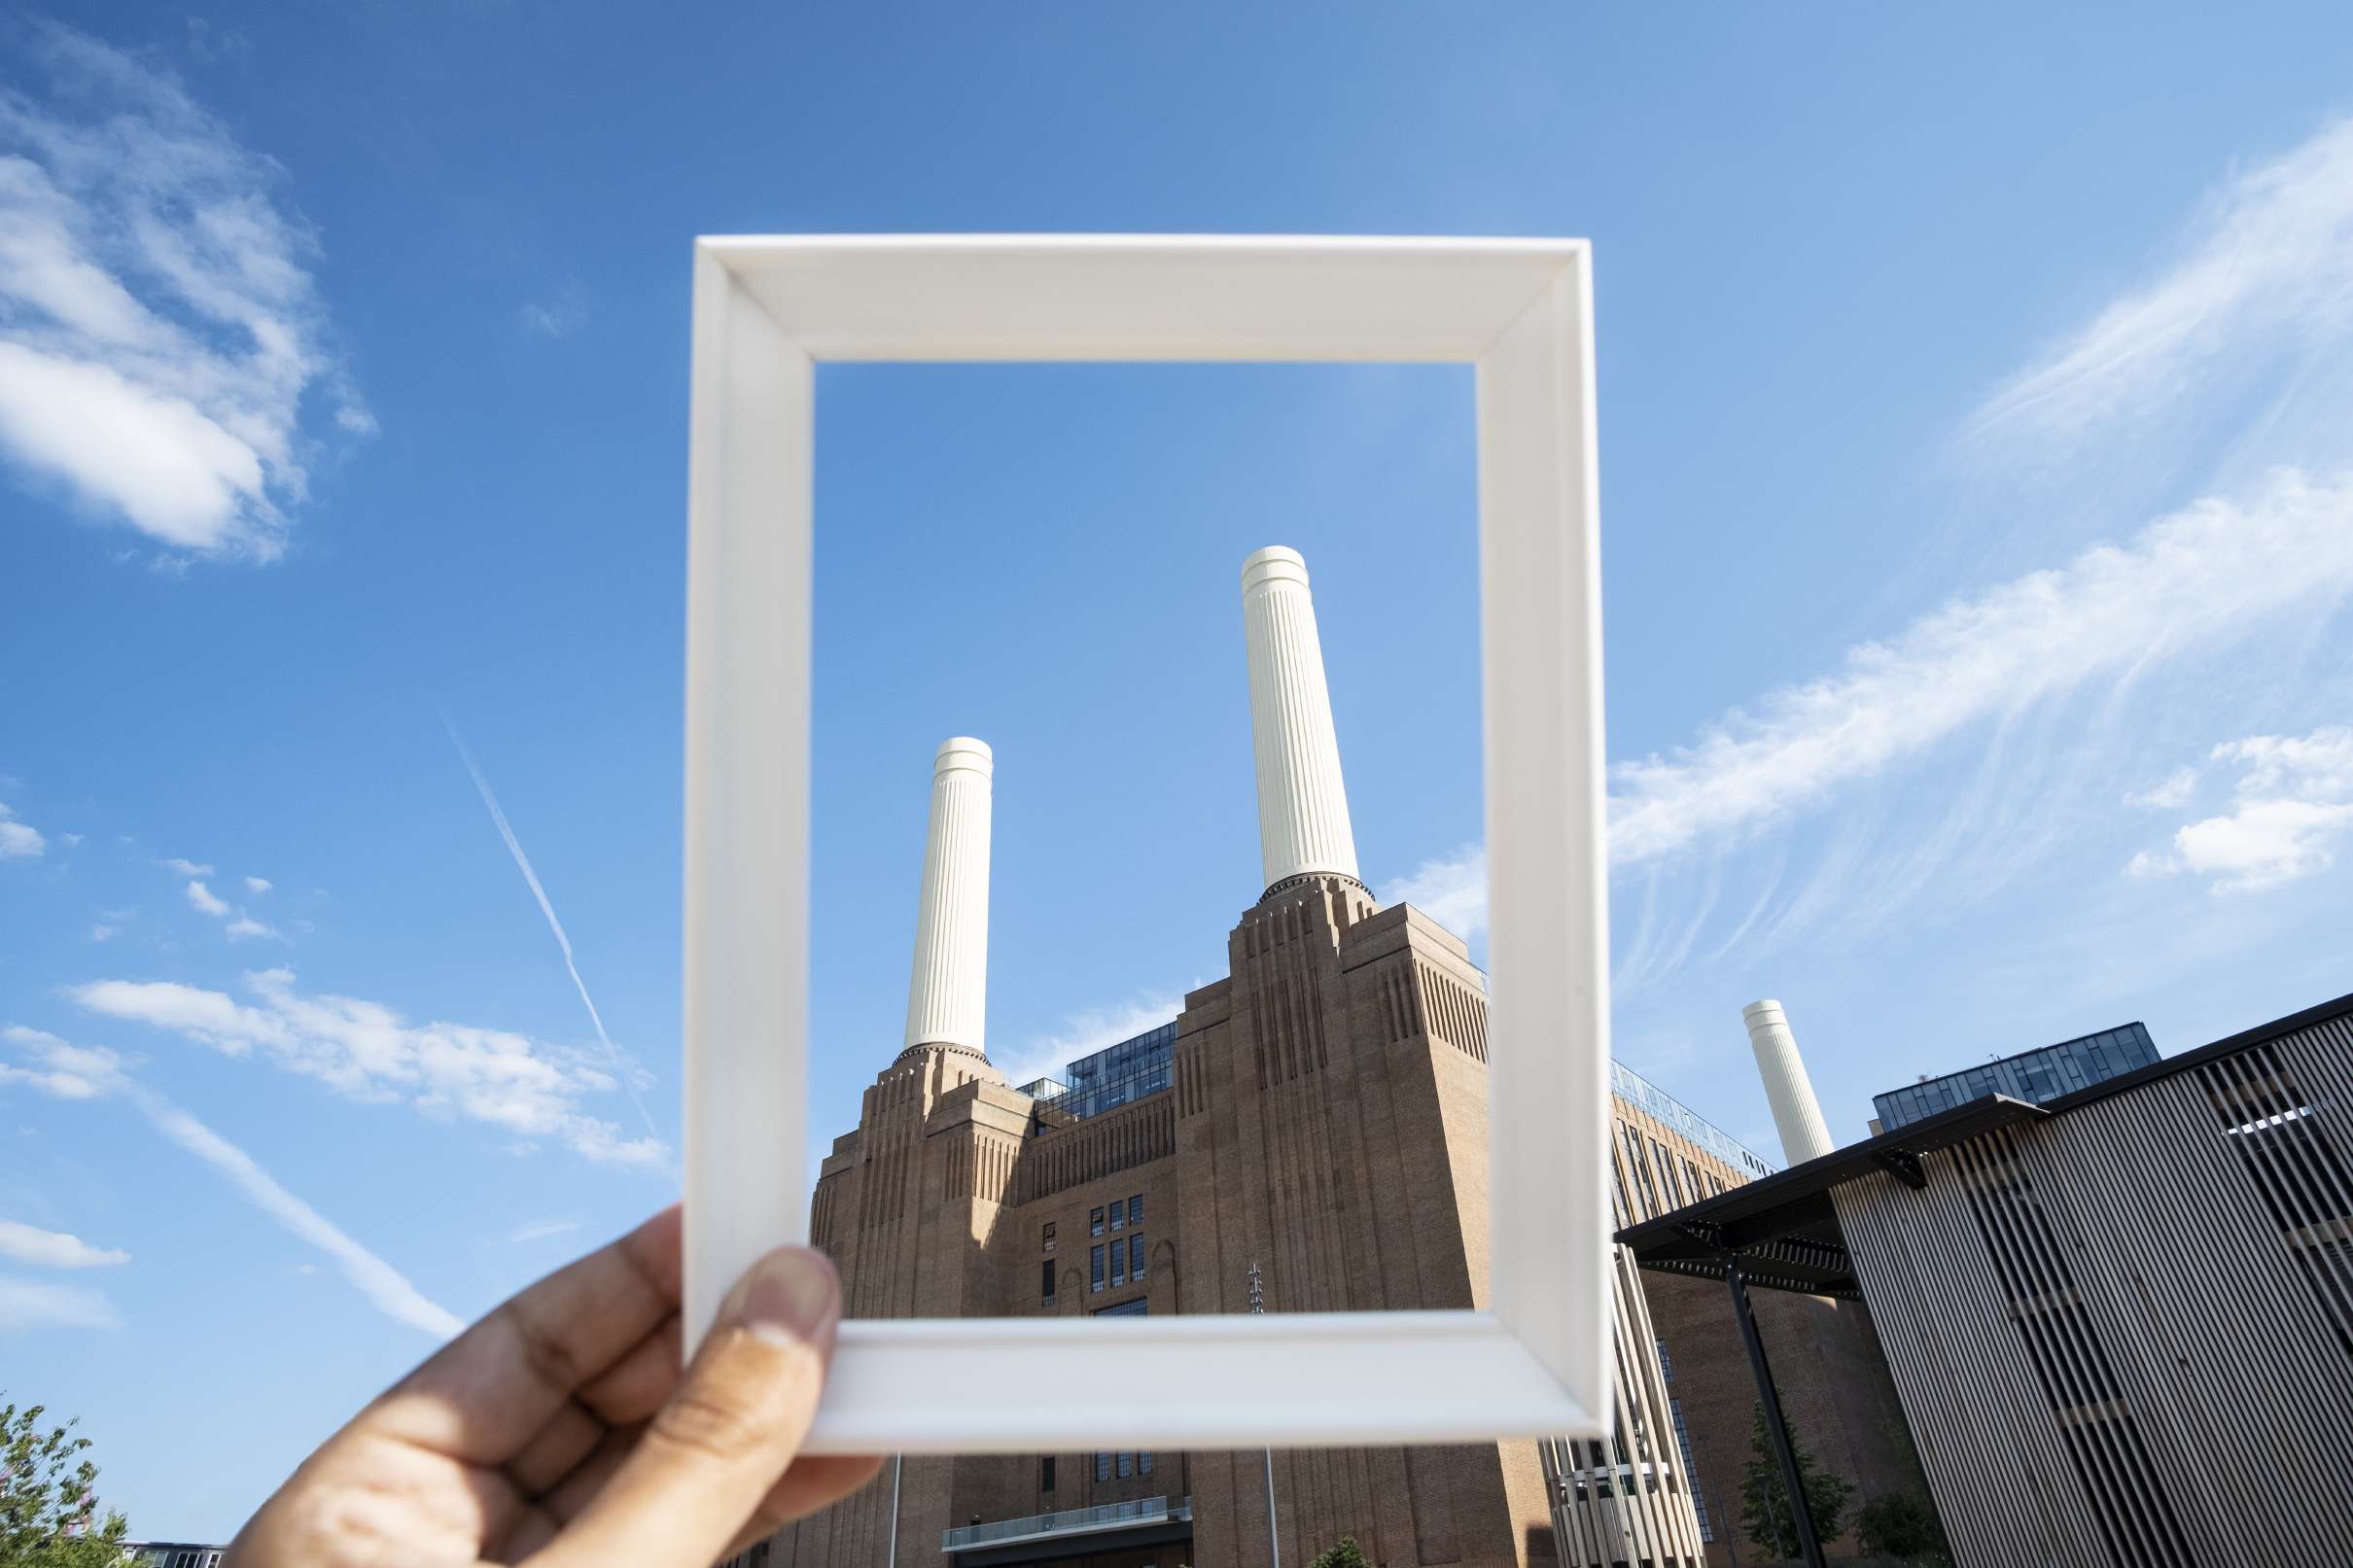 Factory chimneys through a picture frame